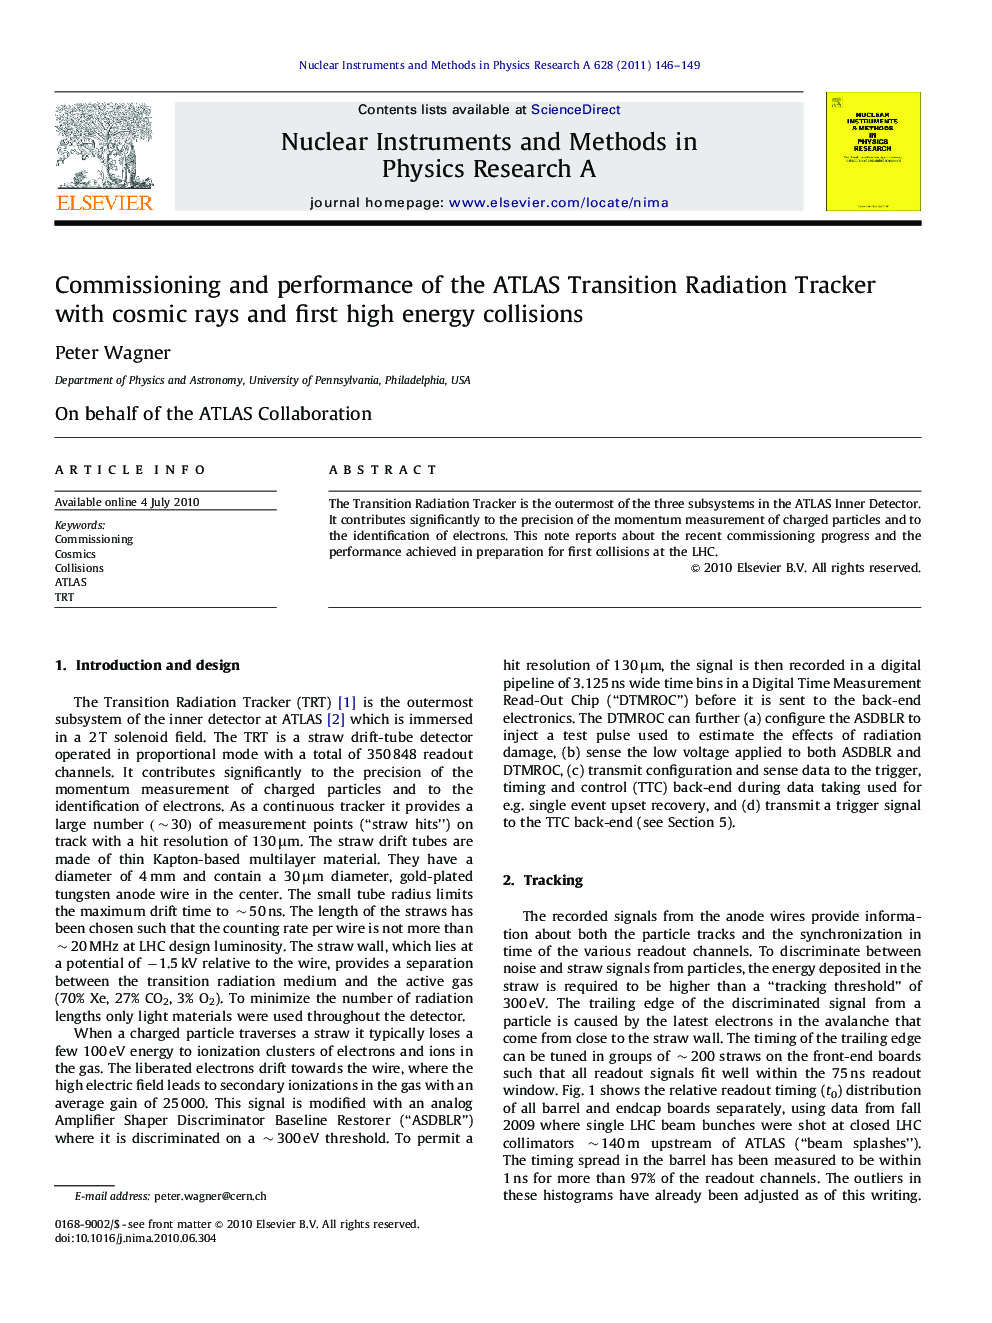 Commissioning and performance of the ATLAS Transition Radiation Tracker with cosmic rays and first high energy collisions